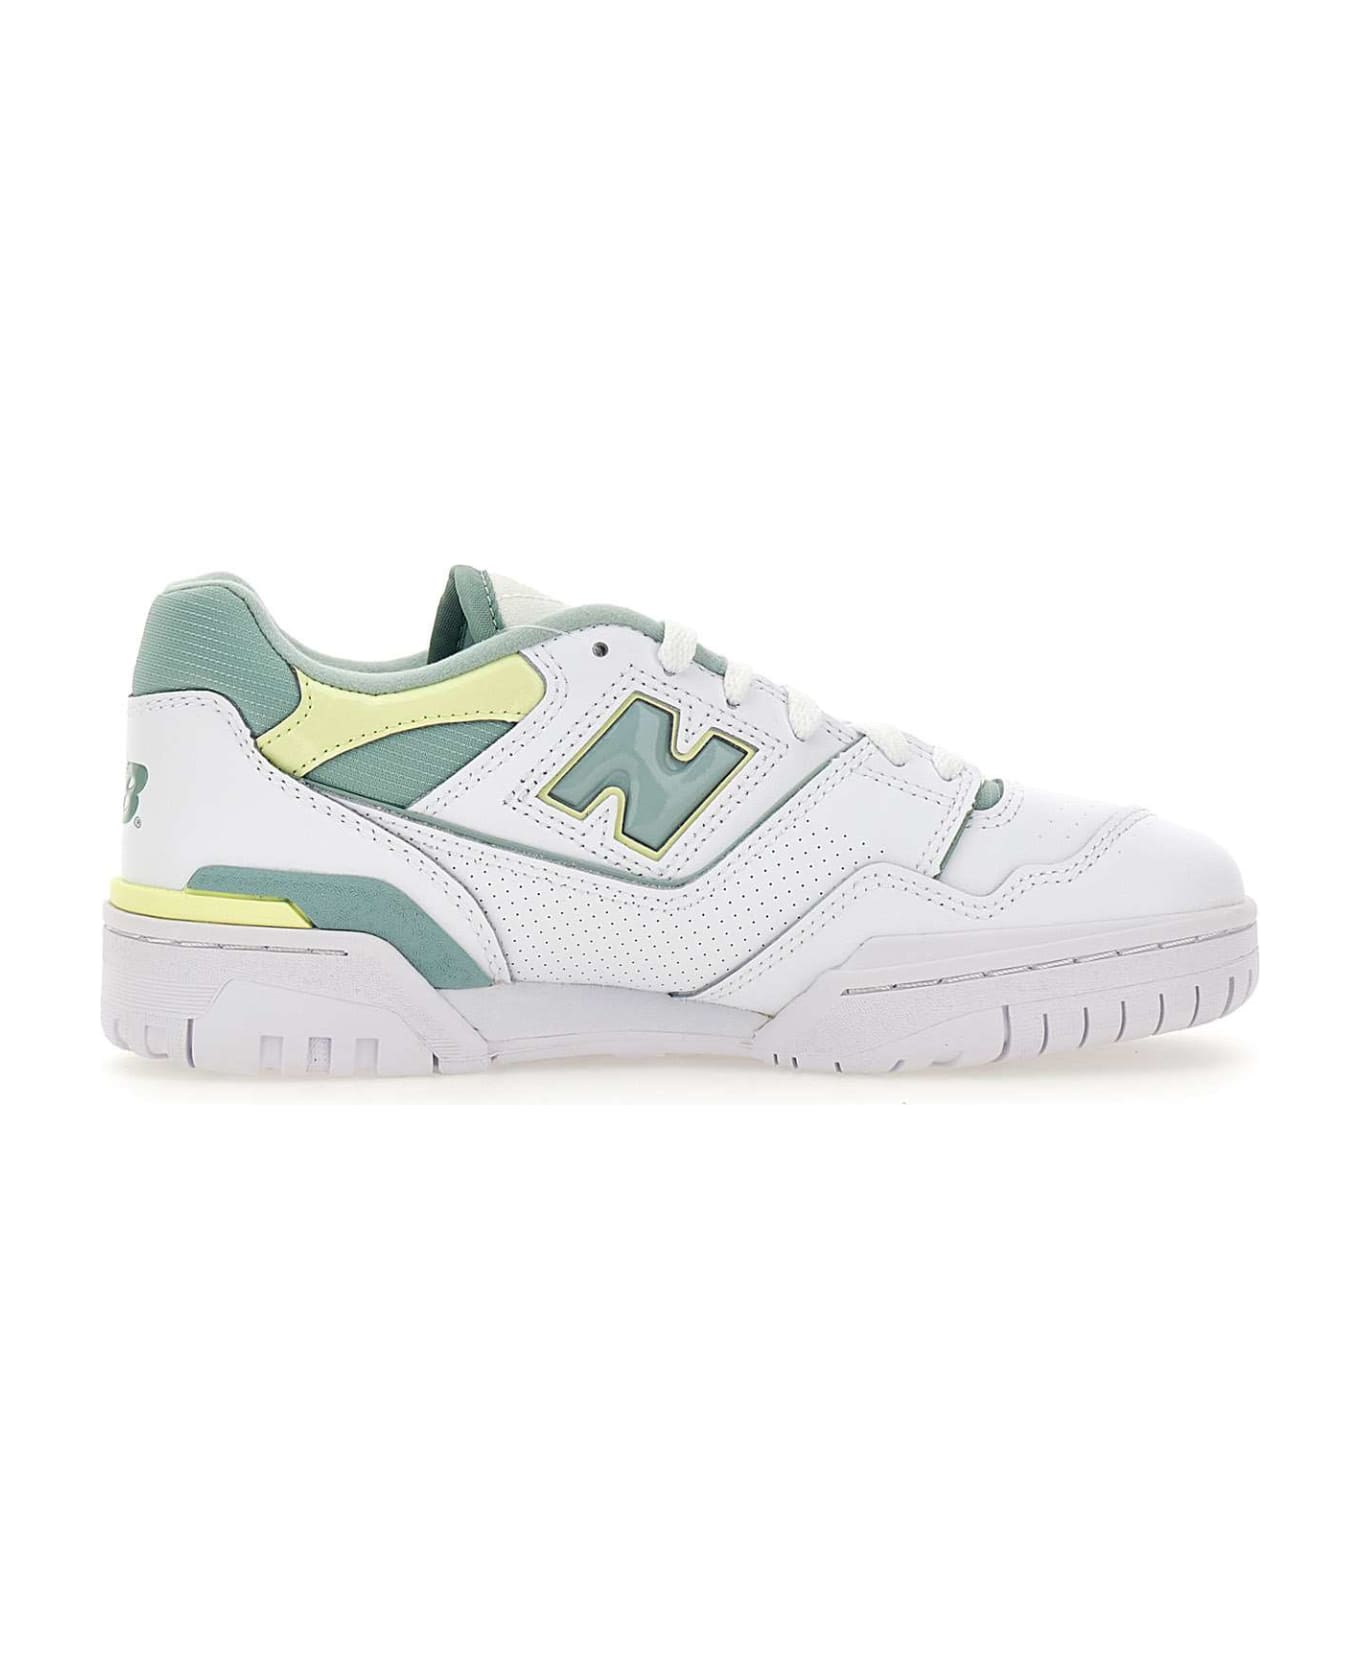 New Balance "bb550" Leather Sneakers - White-grey